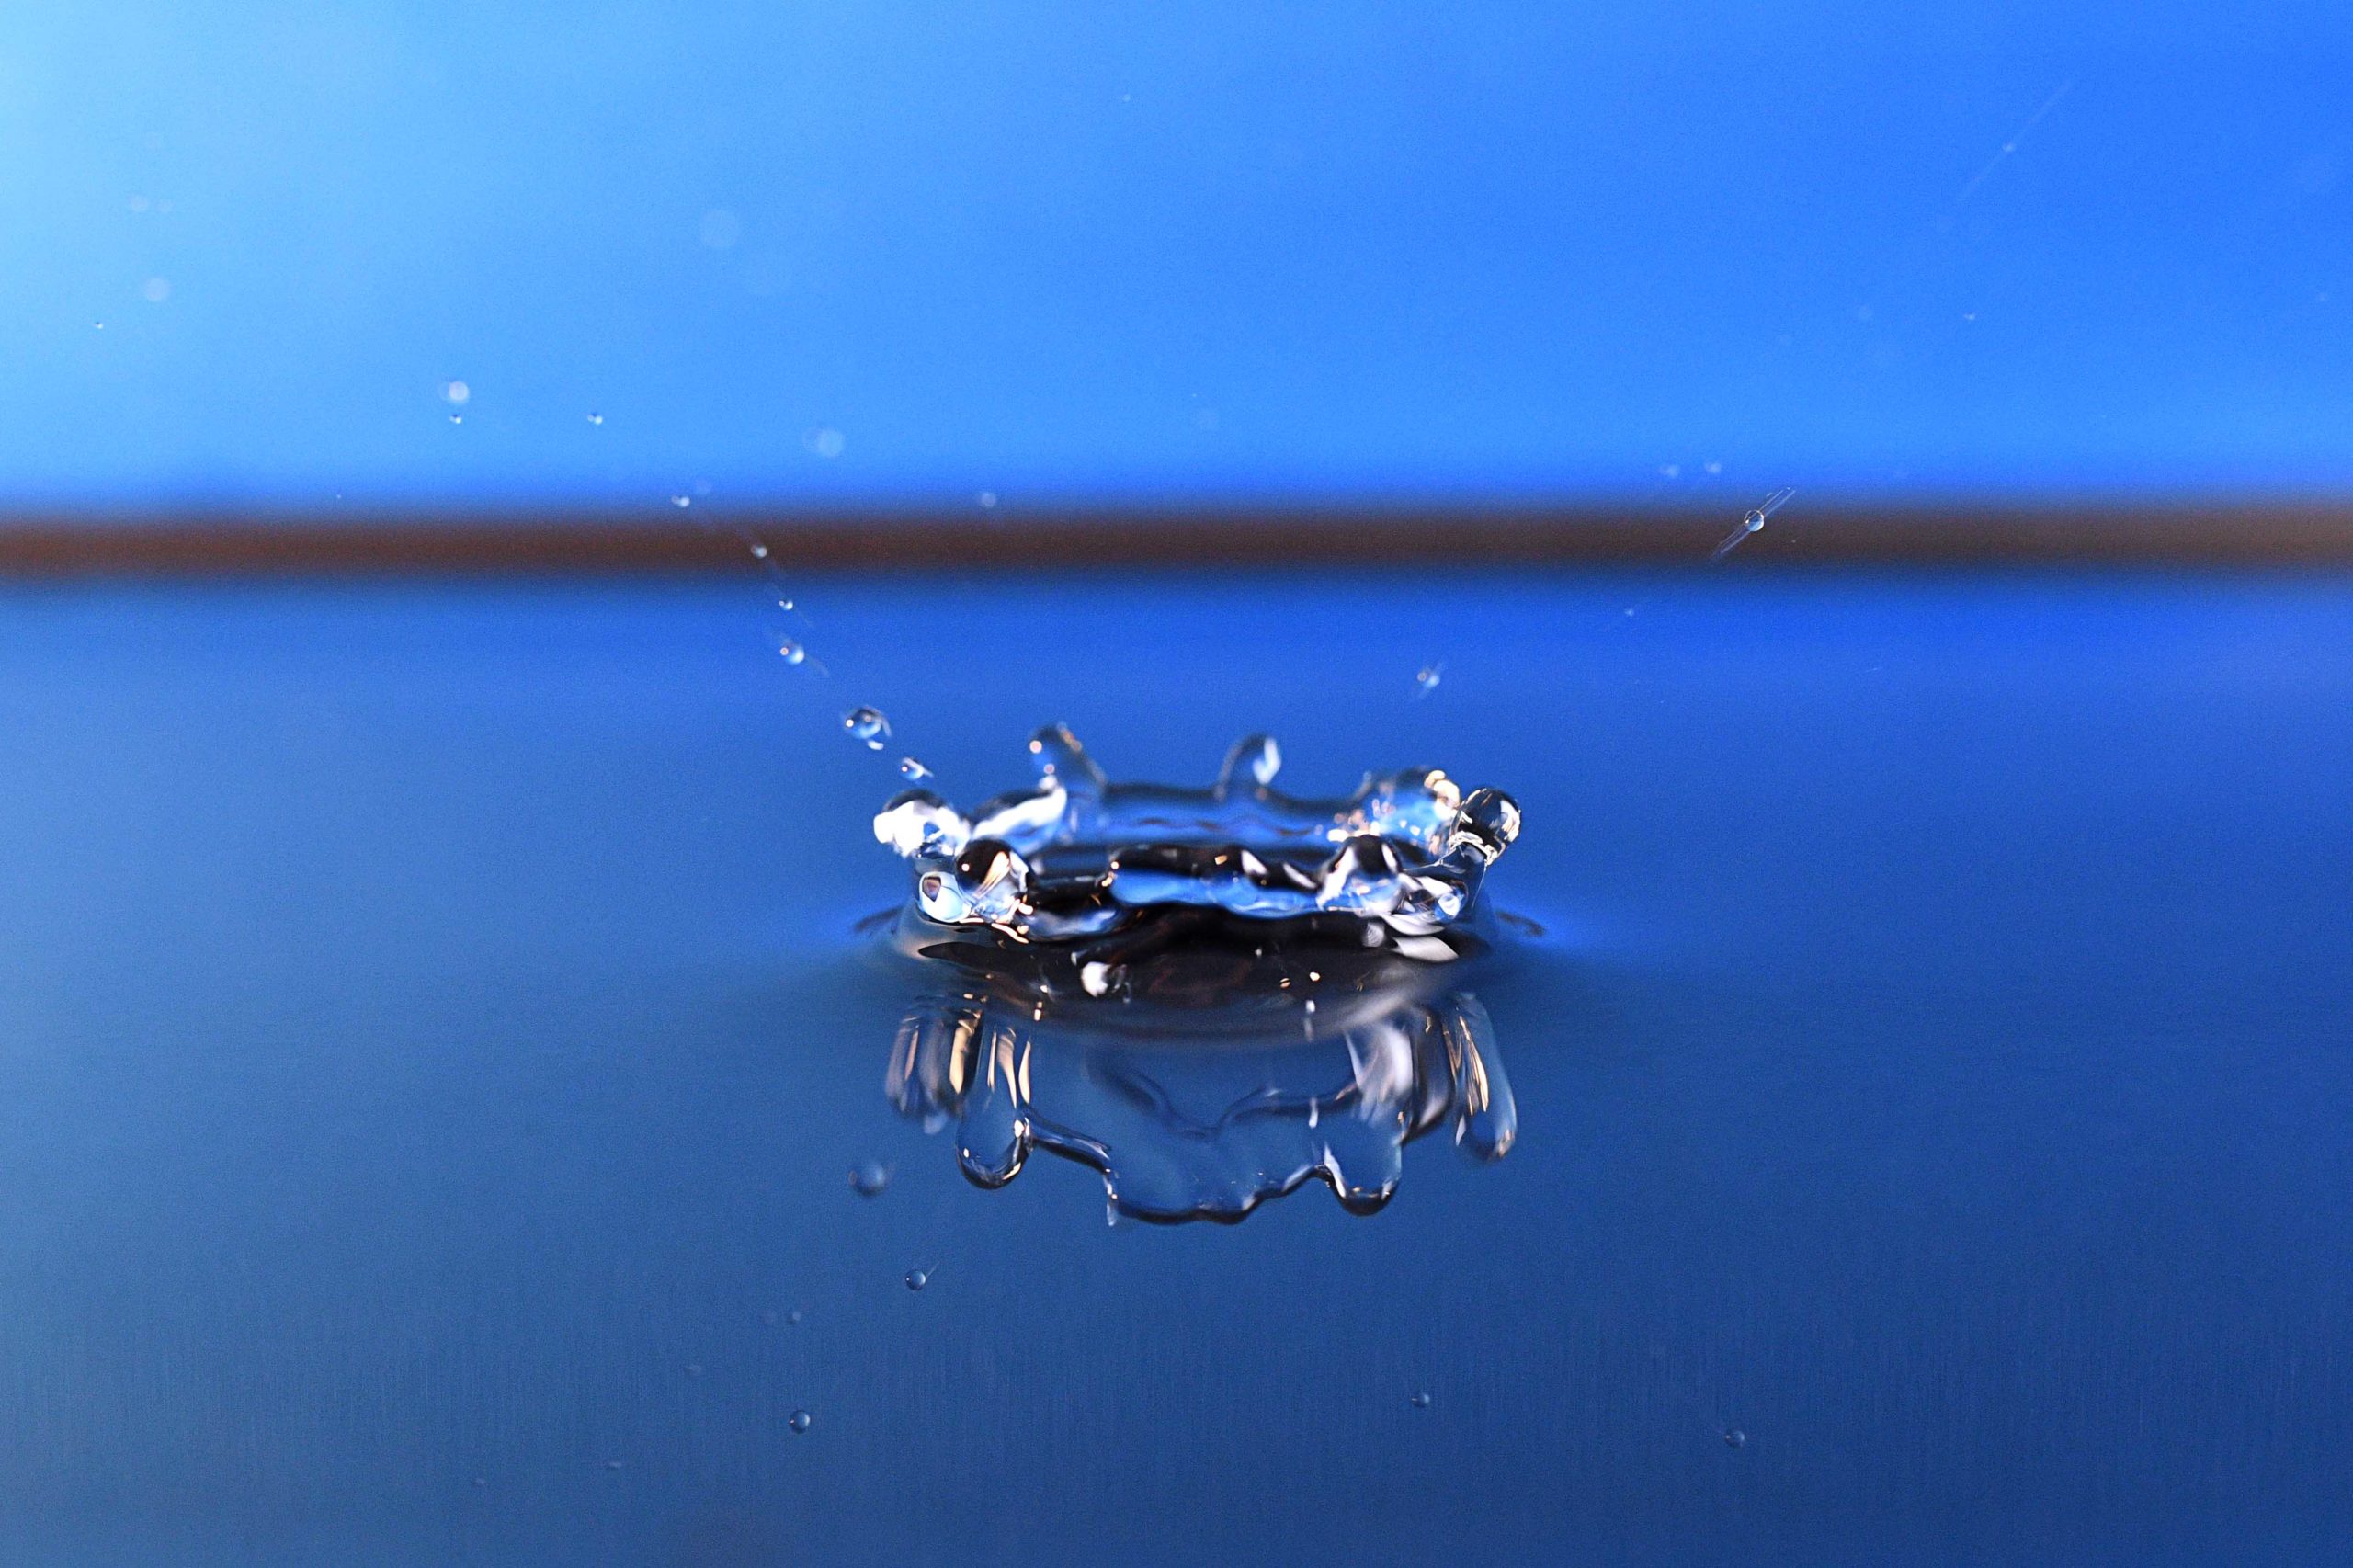 close up of a water droplet making a splash